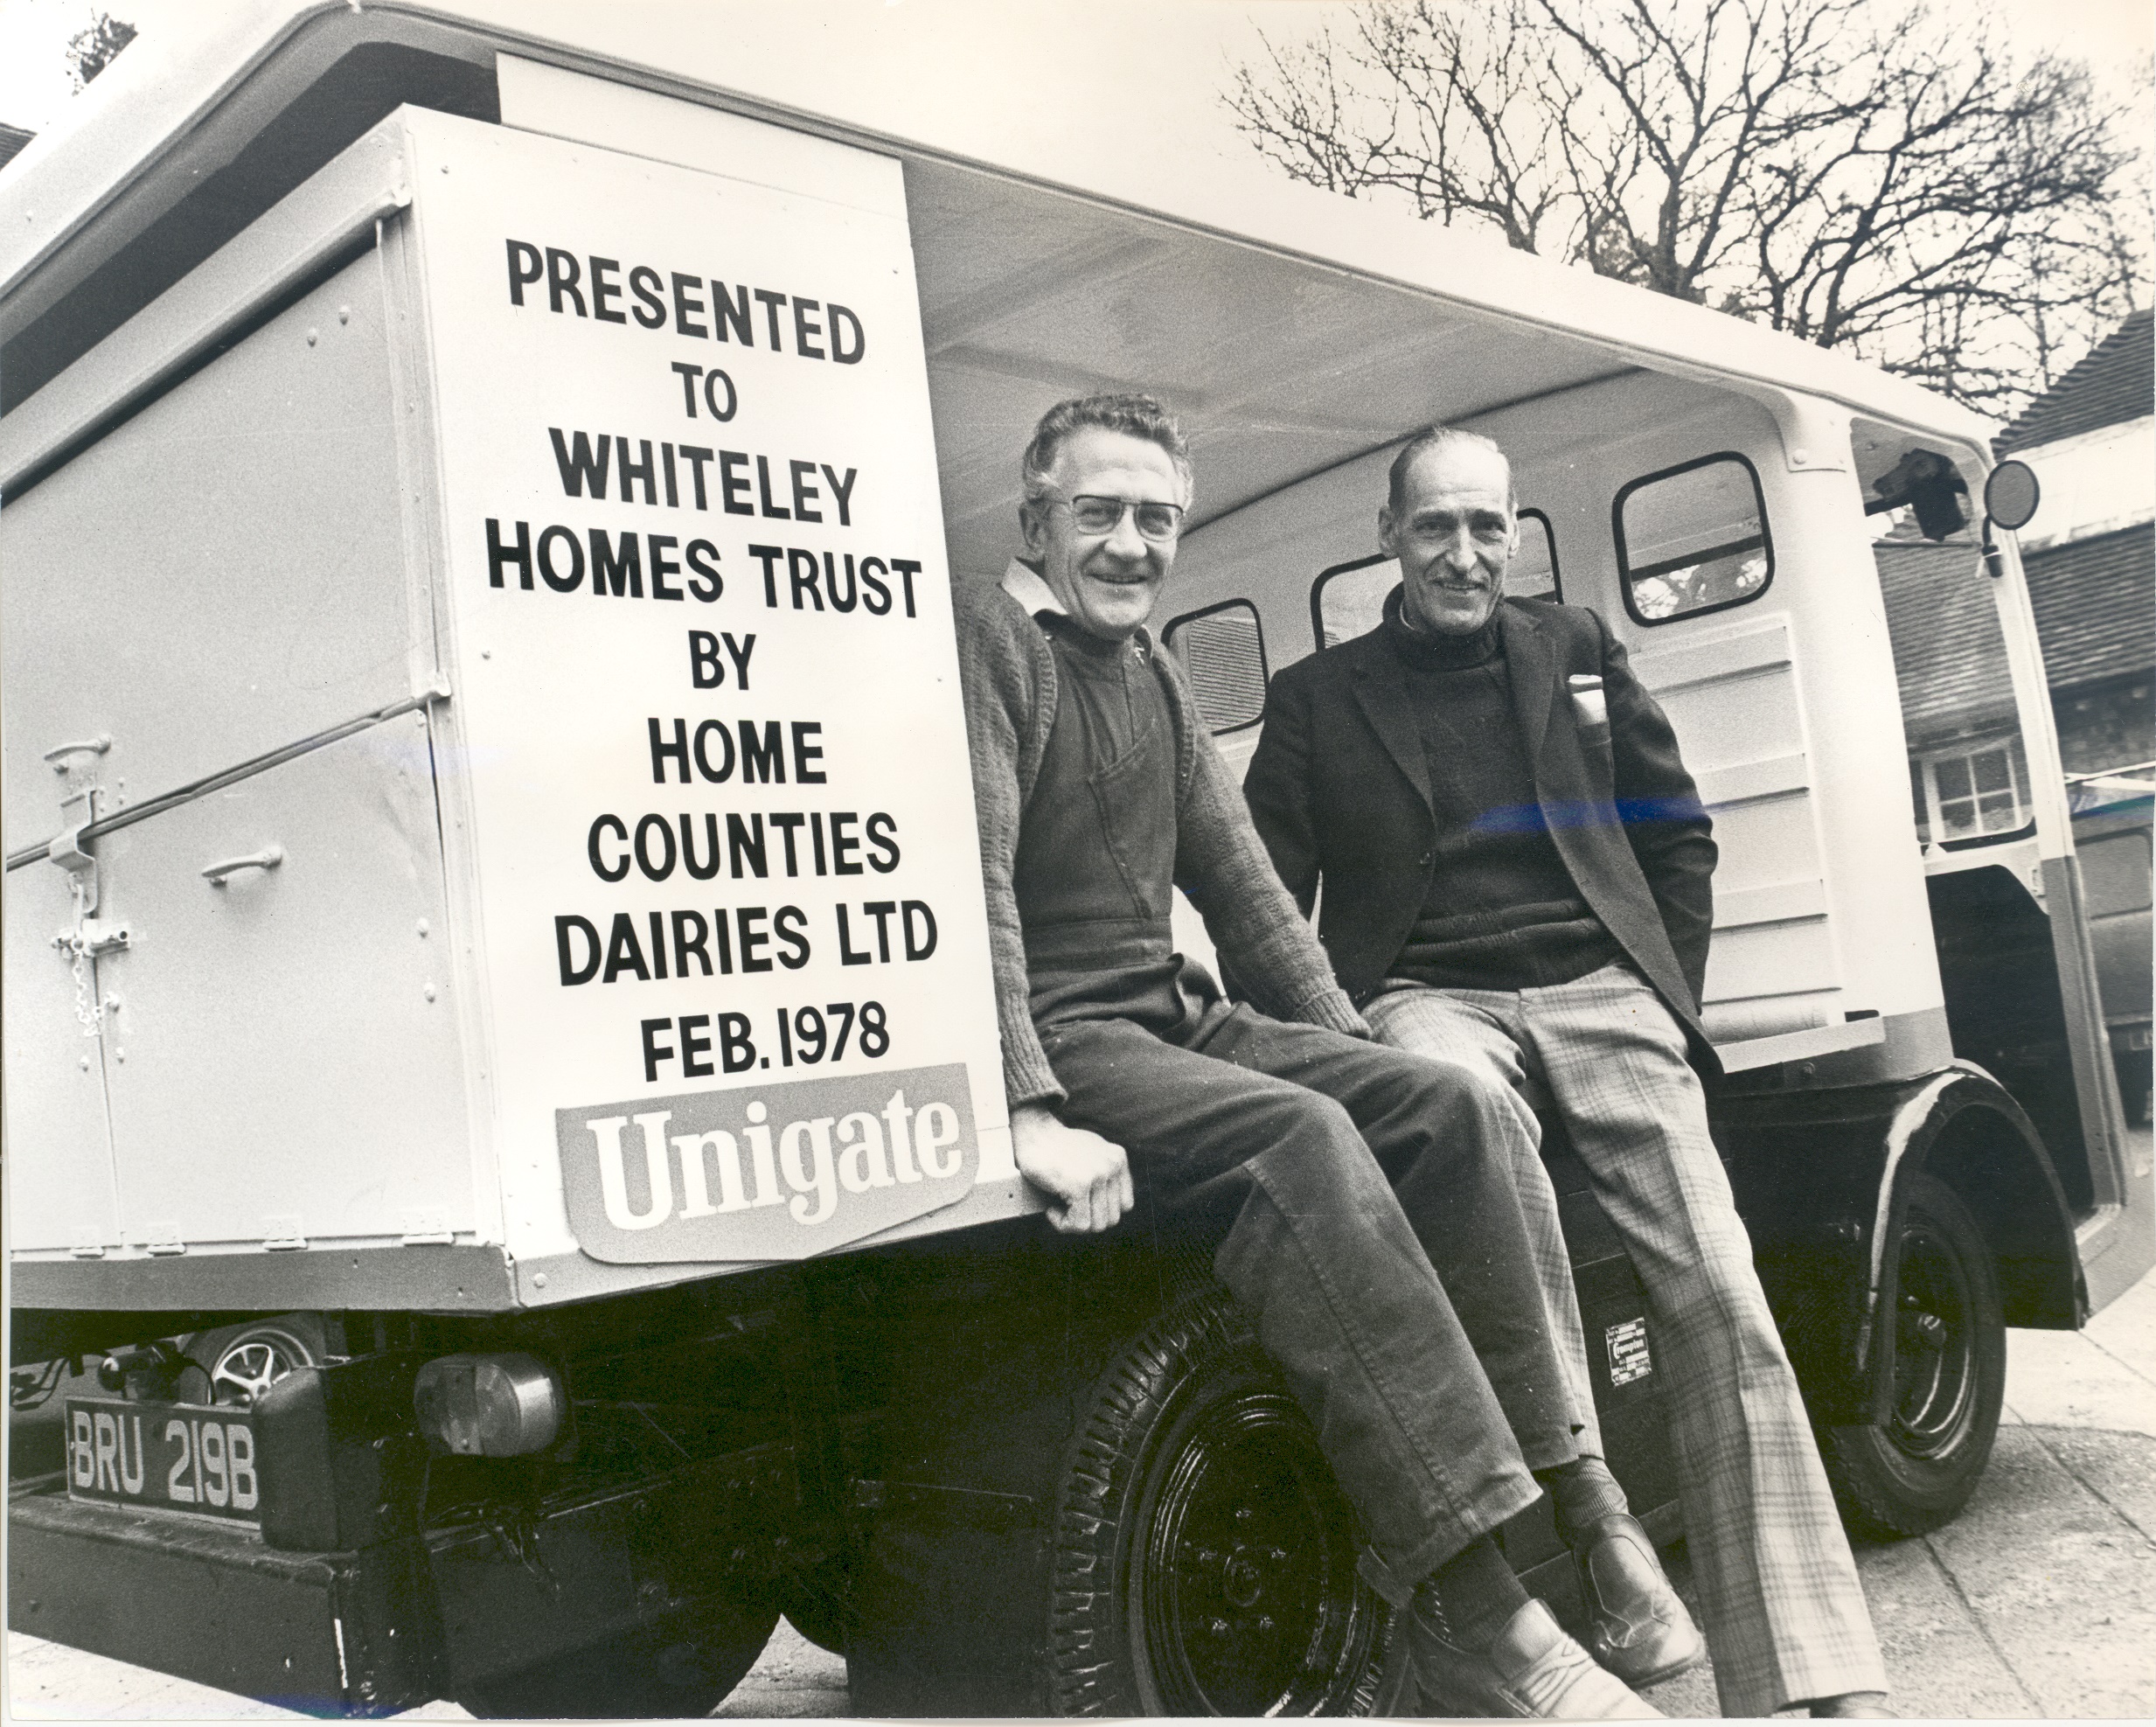 The Unigate Milk cart presented to the Whiteley Village Homes Trust, 16th February 1978.